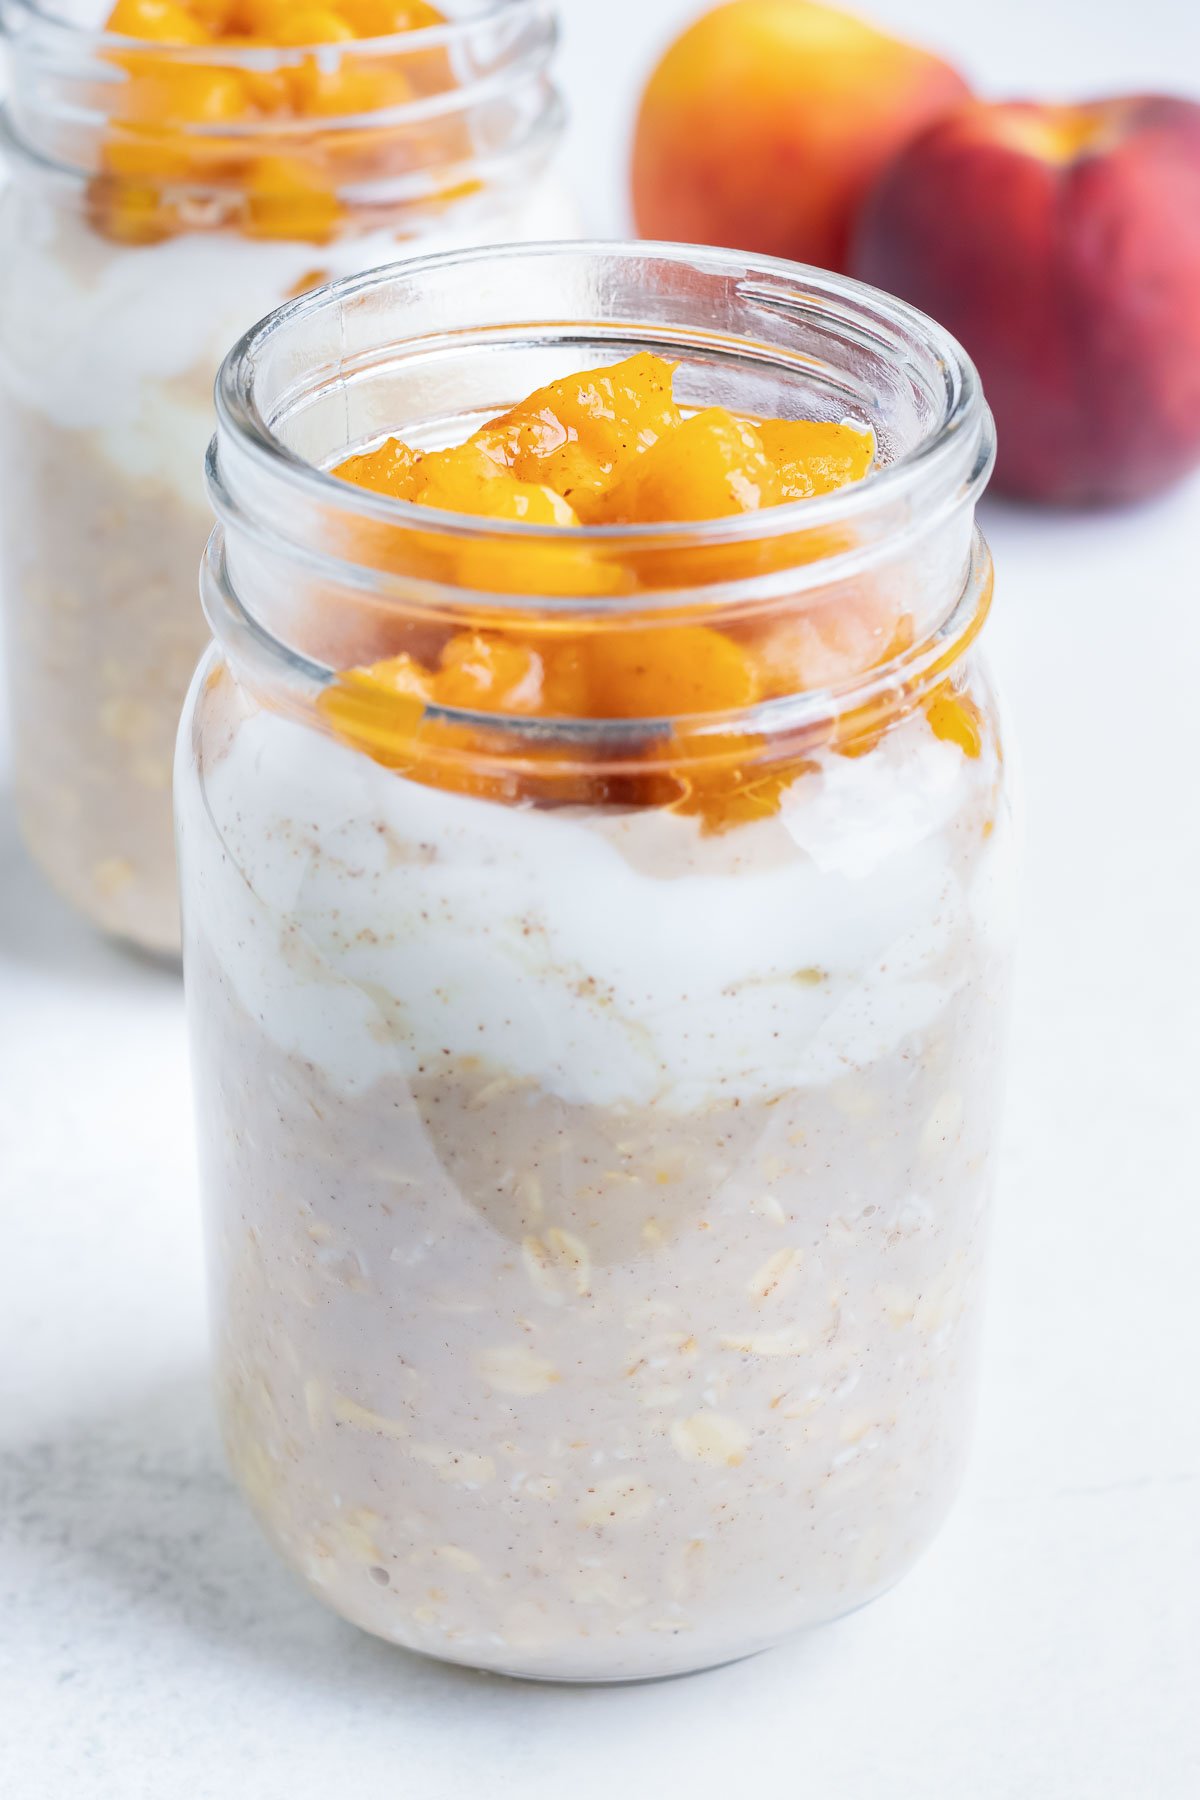 Chopped and cooked peaches are added to the oatmeal jar.